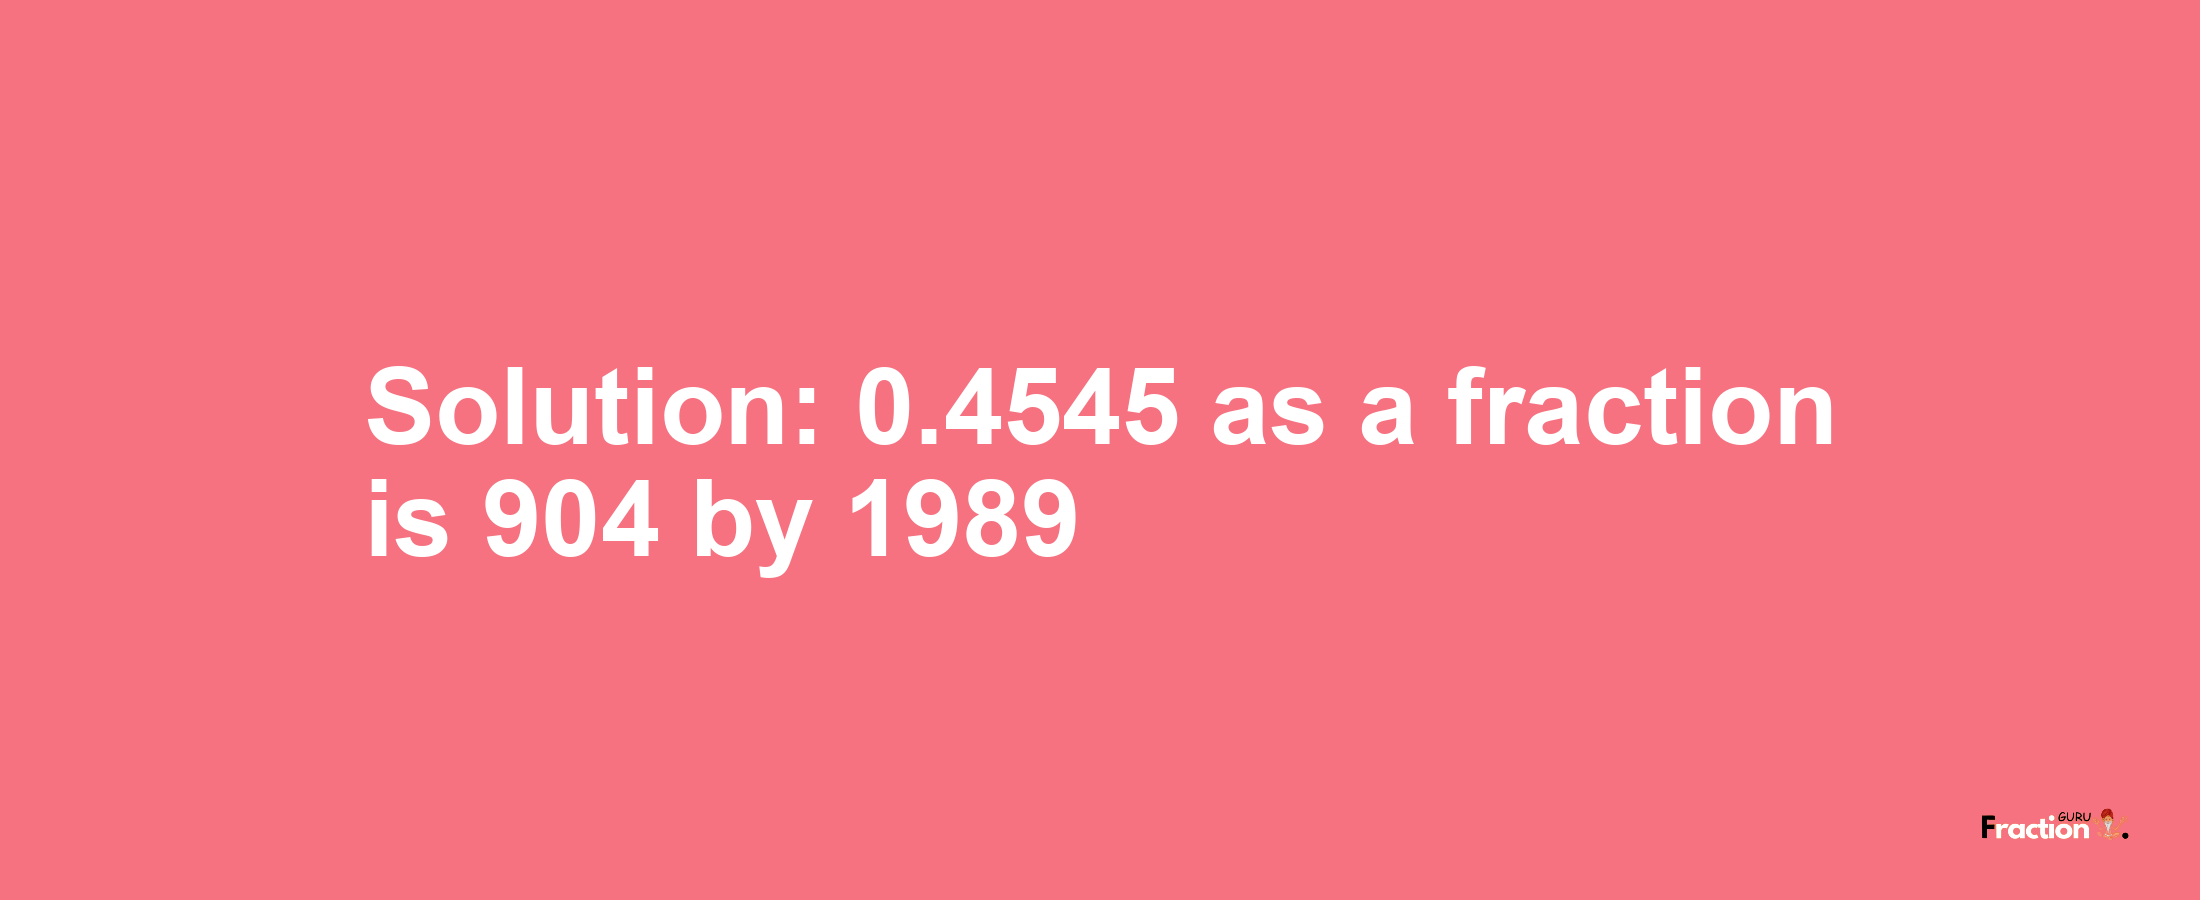 Solution:0.4545 as a fraction is 904/1989